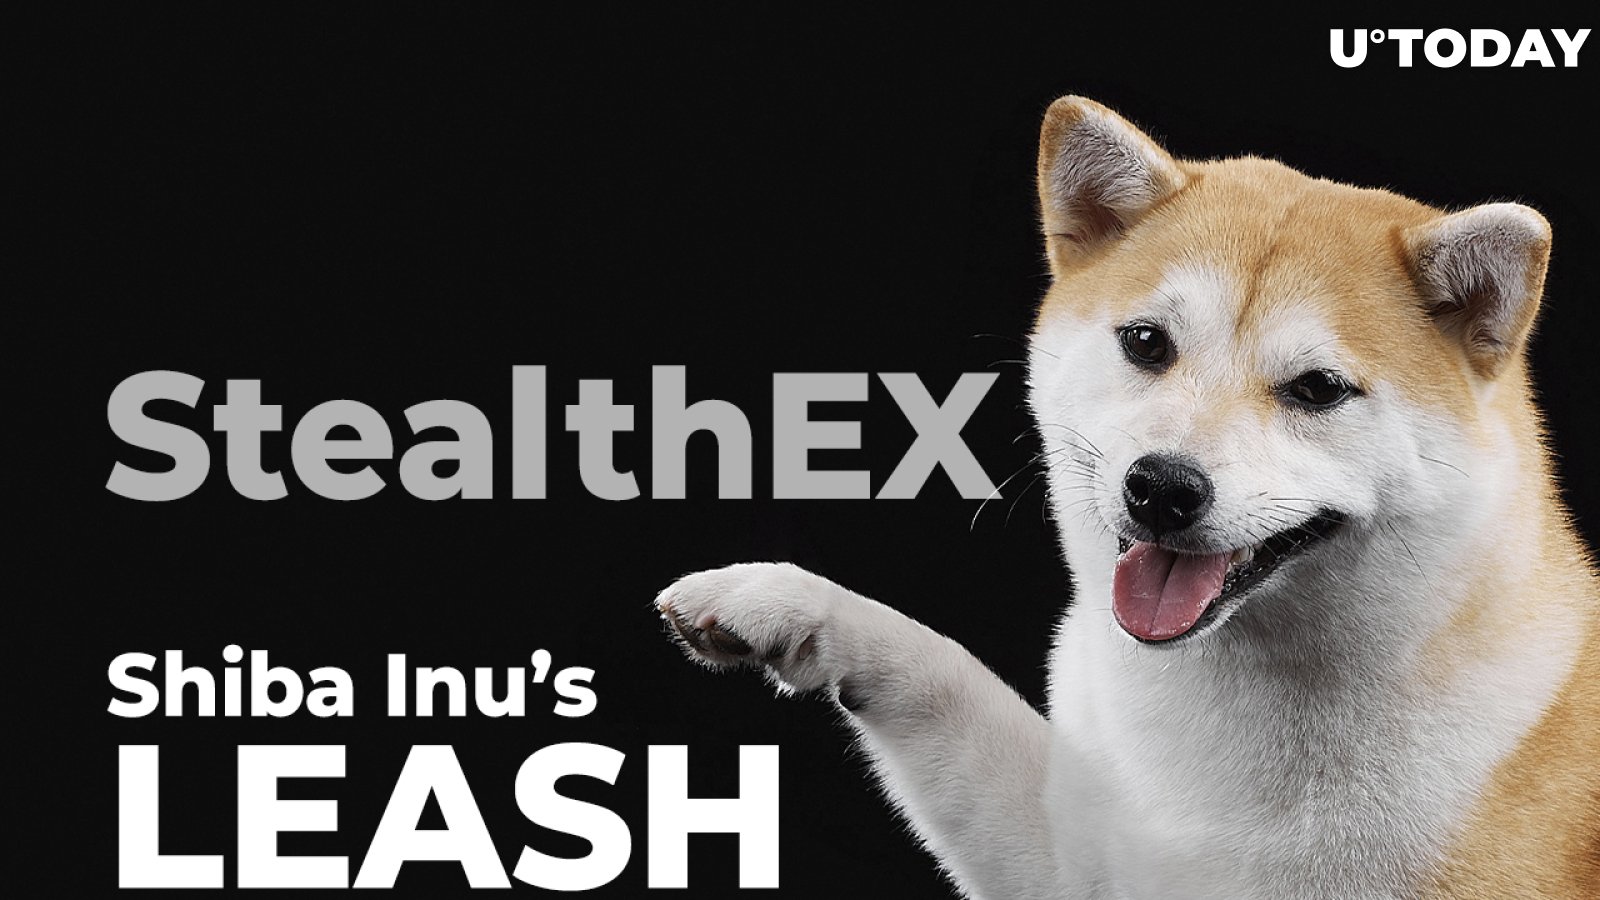 Shiba Inu's LEASH Debuts on StealthEX, Enabling Swapping with More Than 400 Crypto Assets